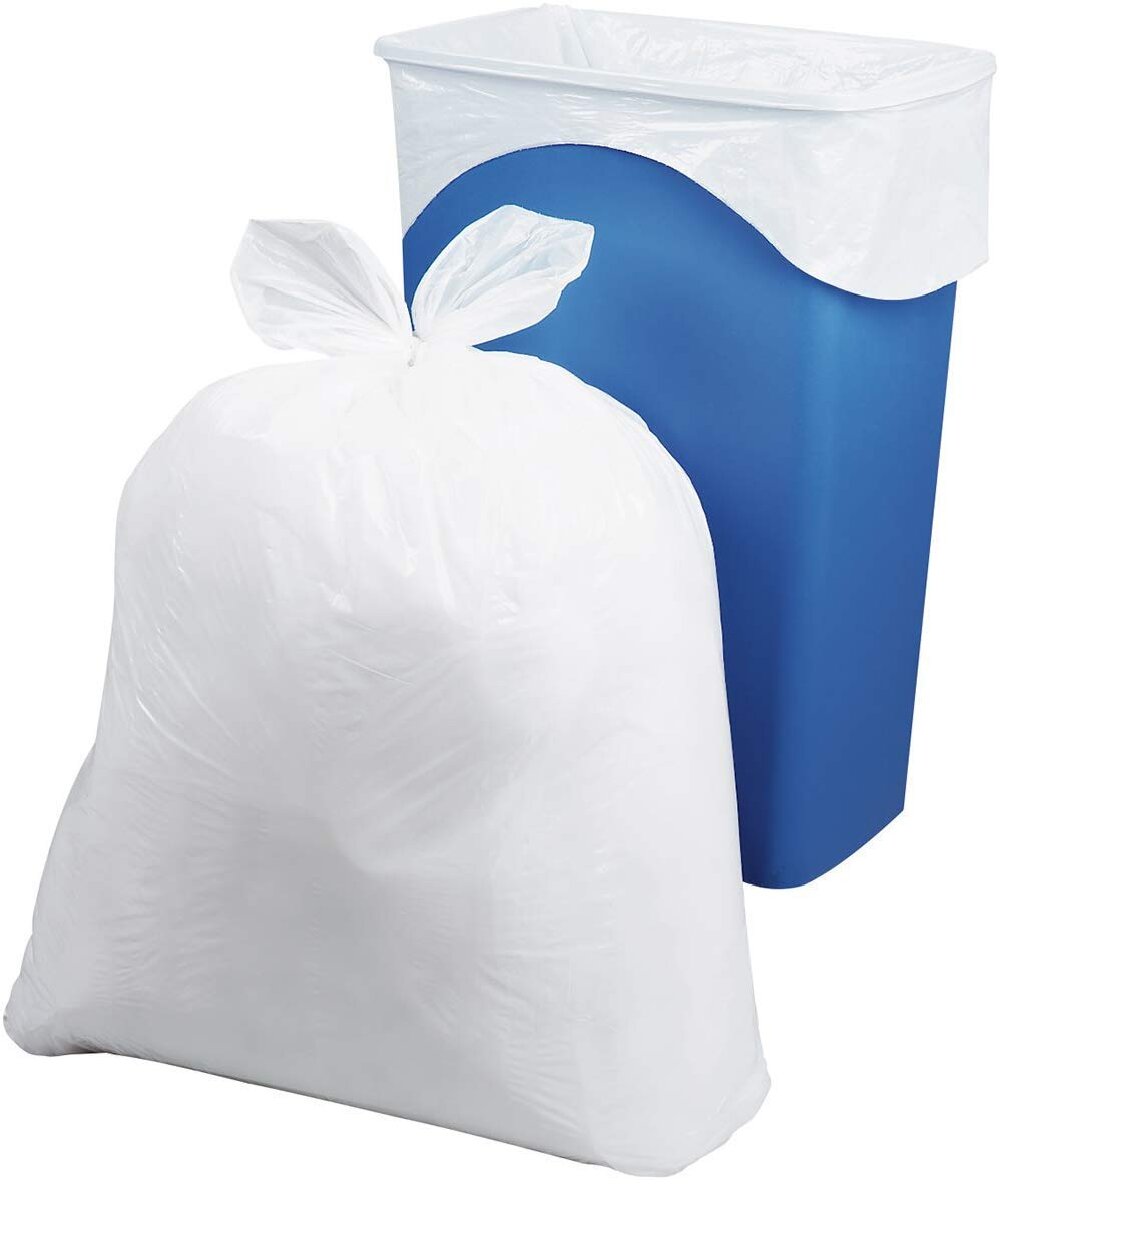 Small Flap Tie Trash Bags